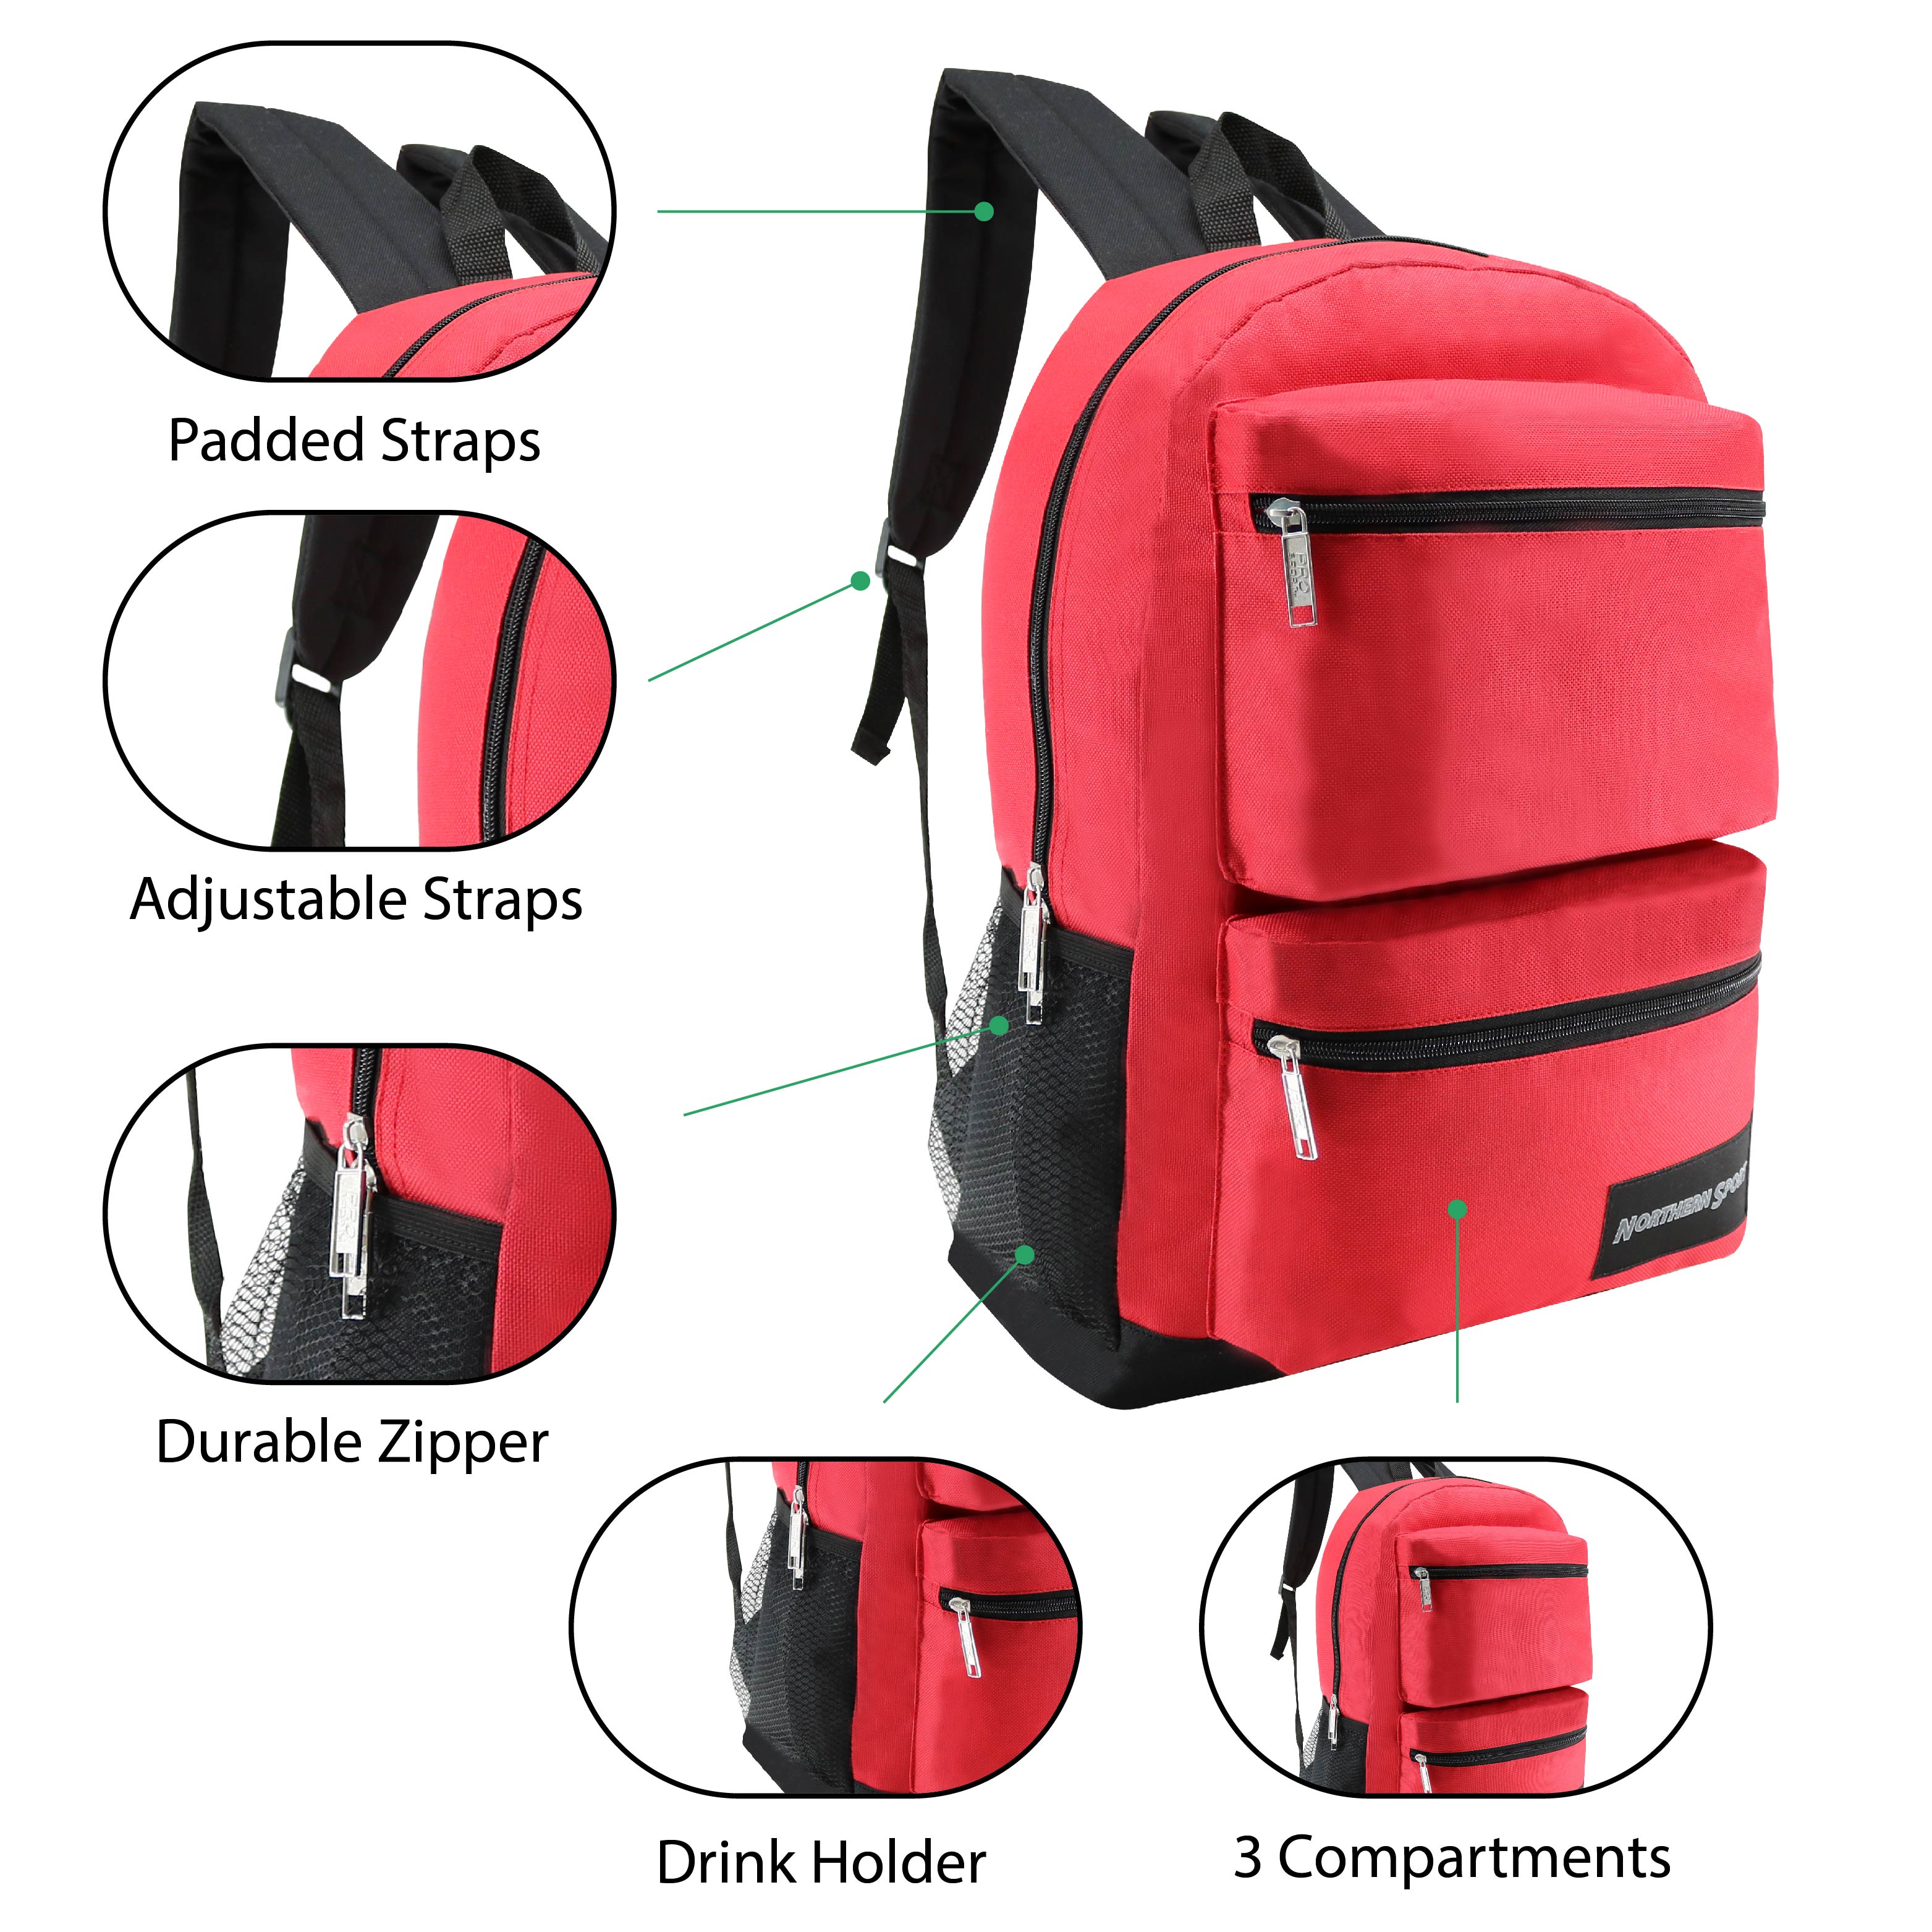 12 Wholesale Deluxe 17" 3 Compartment Backpacks and 12 Bulk School Supply Kits of Your Choice